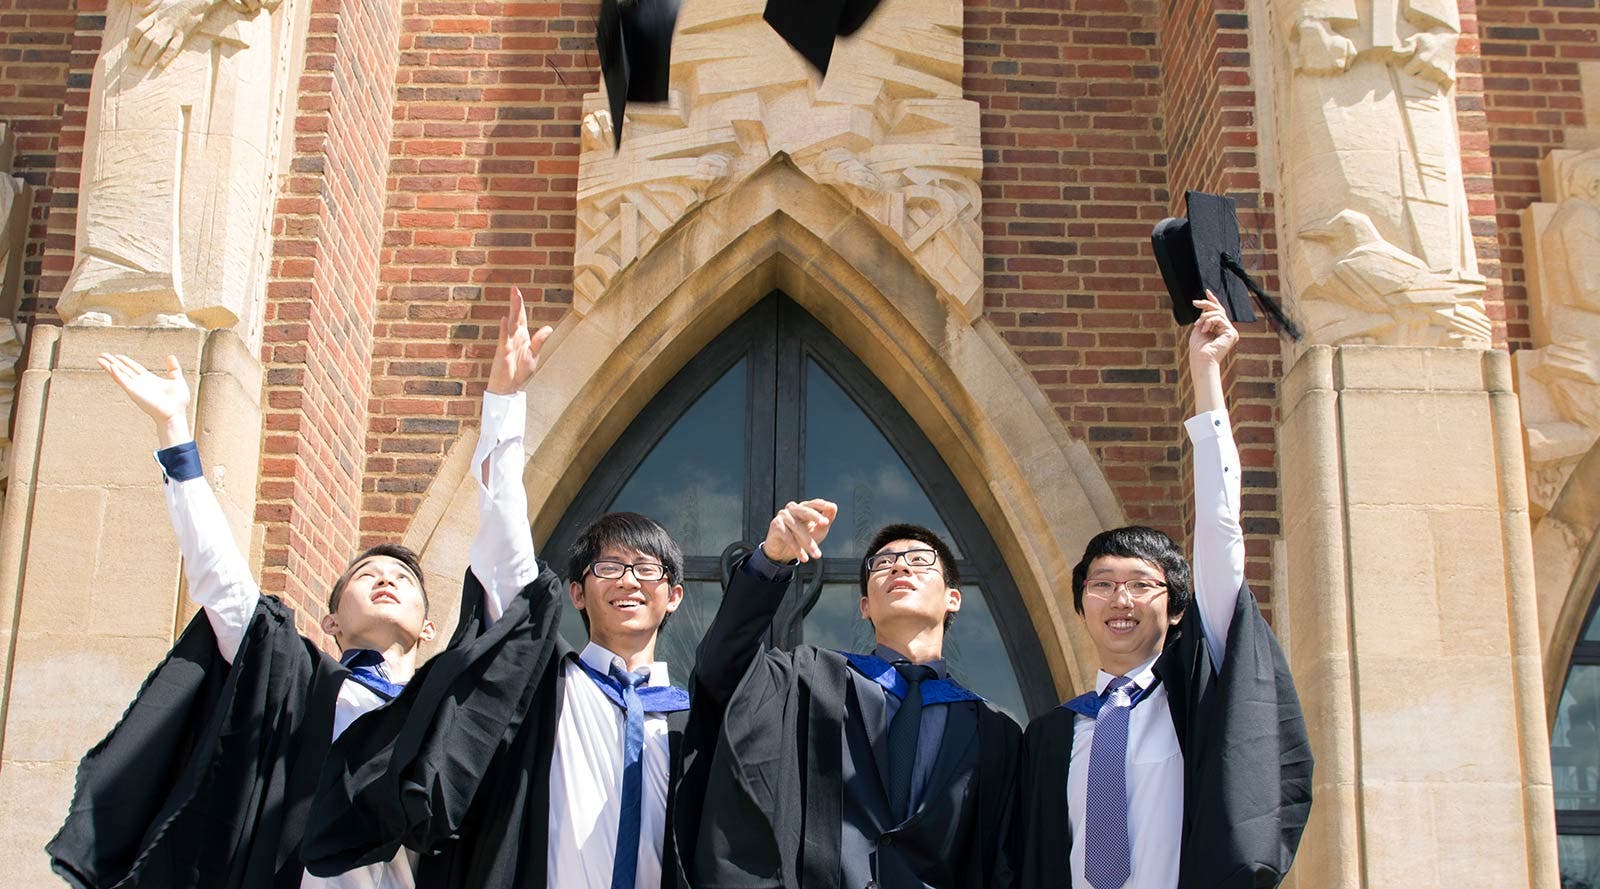 Surrey graduates throwing hats in the air